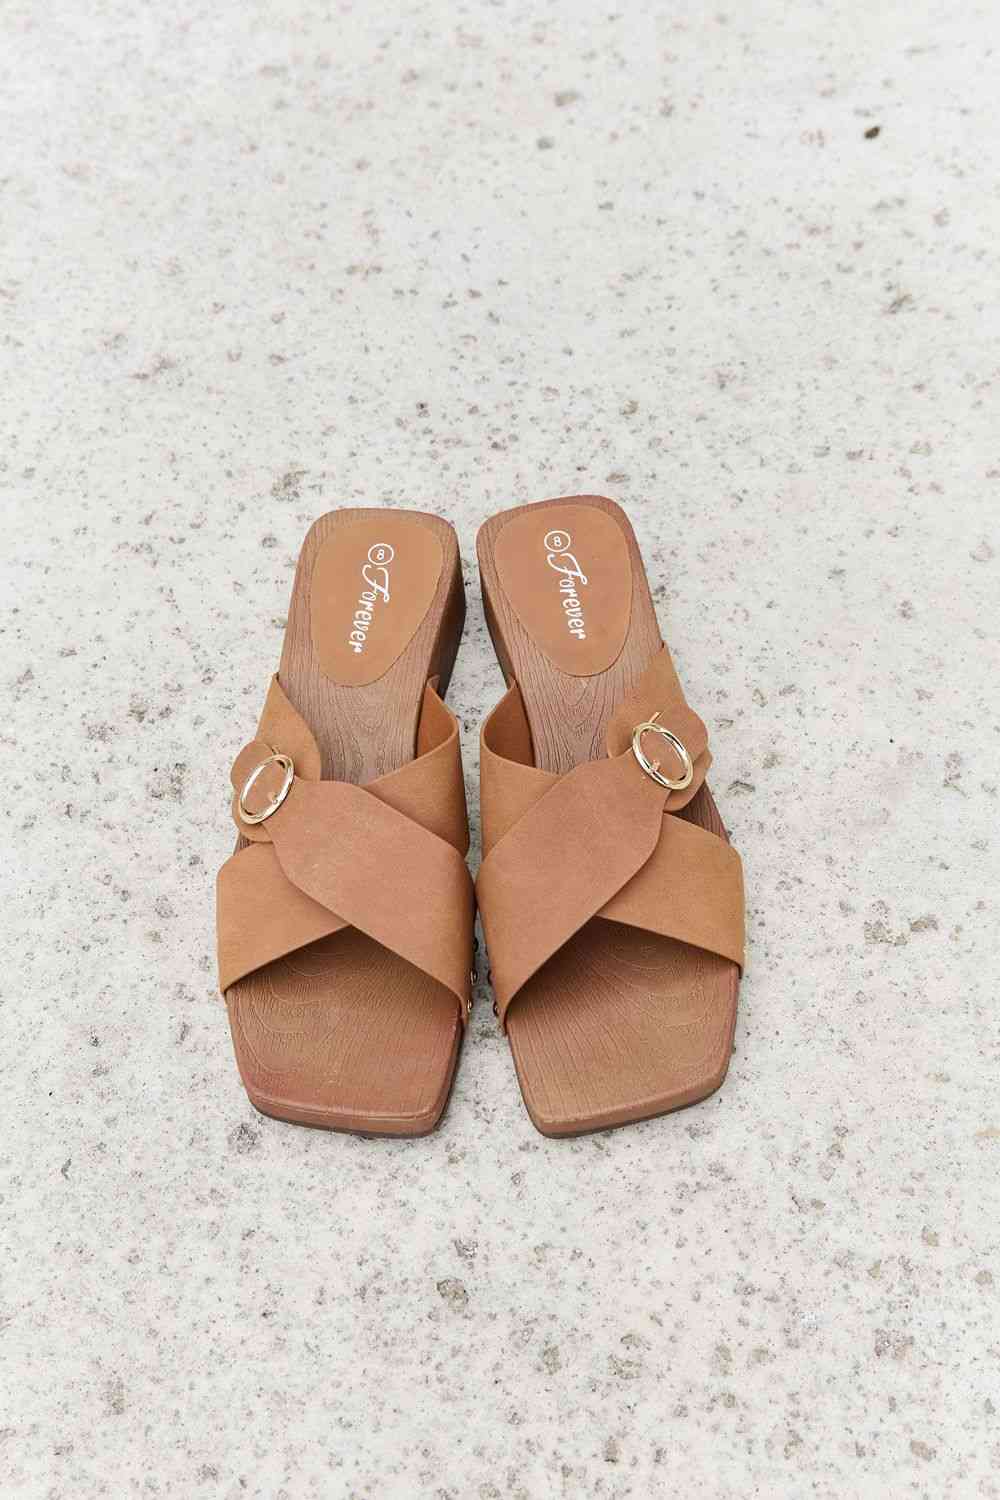 Light Gray Forever Link Square Toe Cross Strap Buckle Clog Sandal in Ochre Sentient Beauty Fashions Shoes